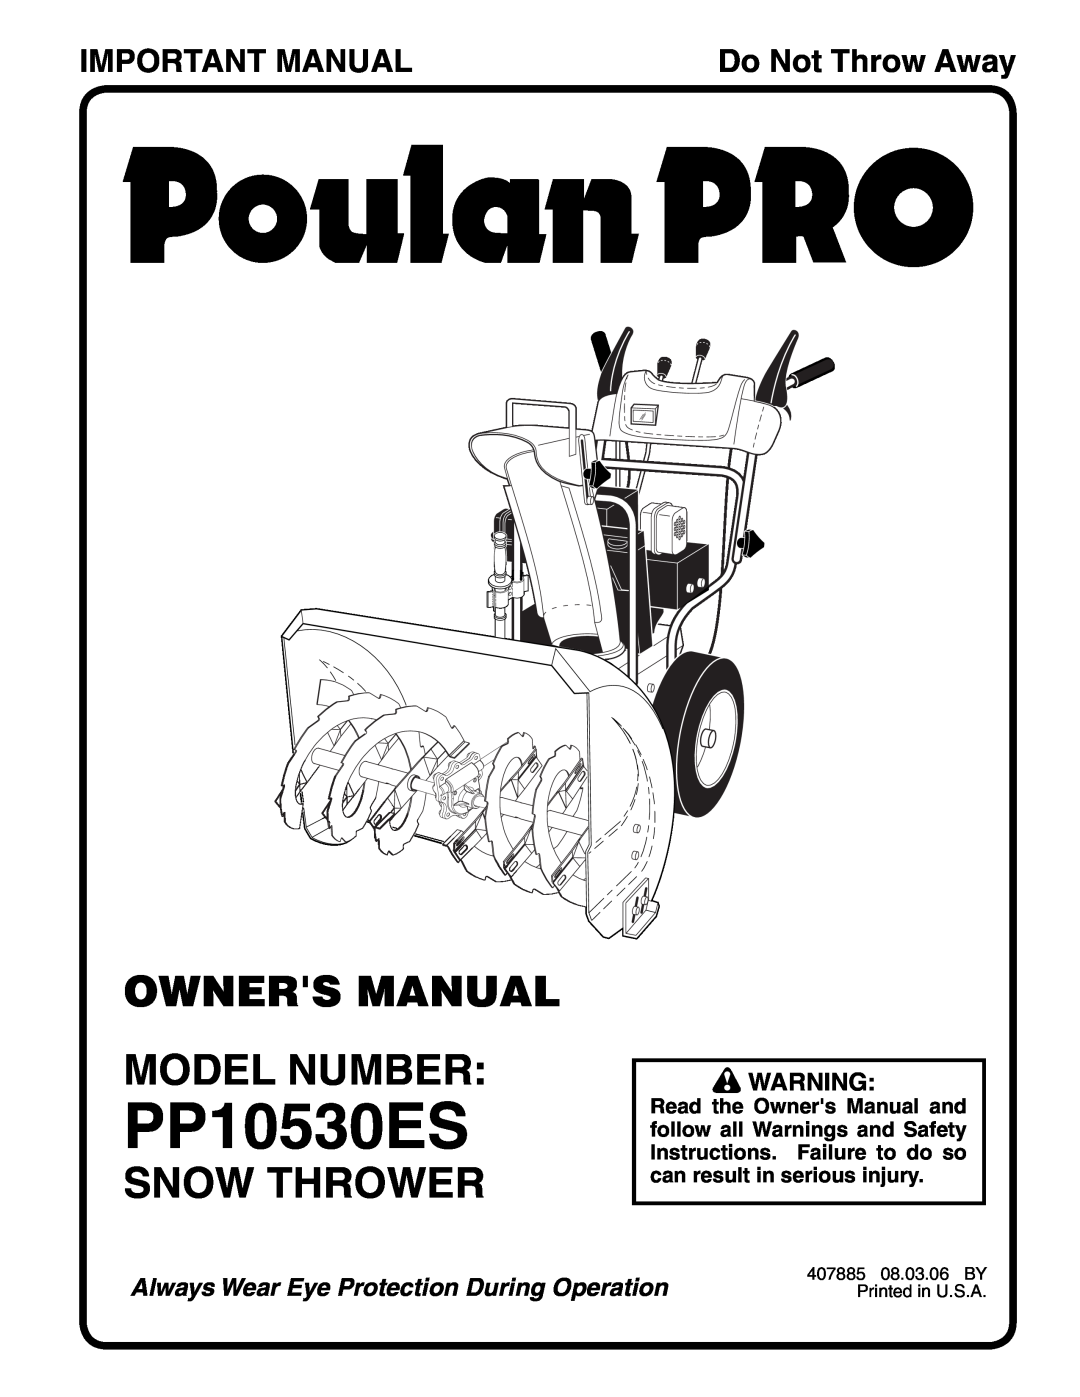 Poulan 407885, 96192001200 owner manual Snow Thrower, Important Manual, PP10530ES, Do Not Throw Away 